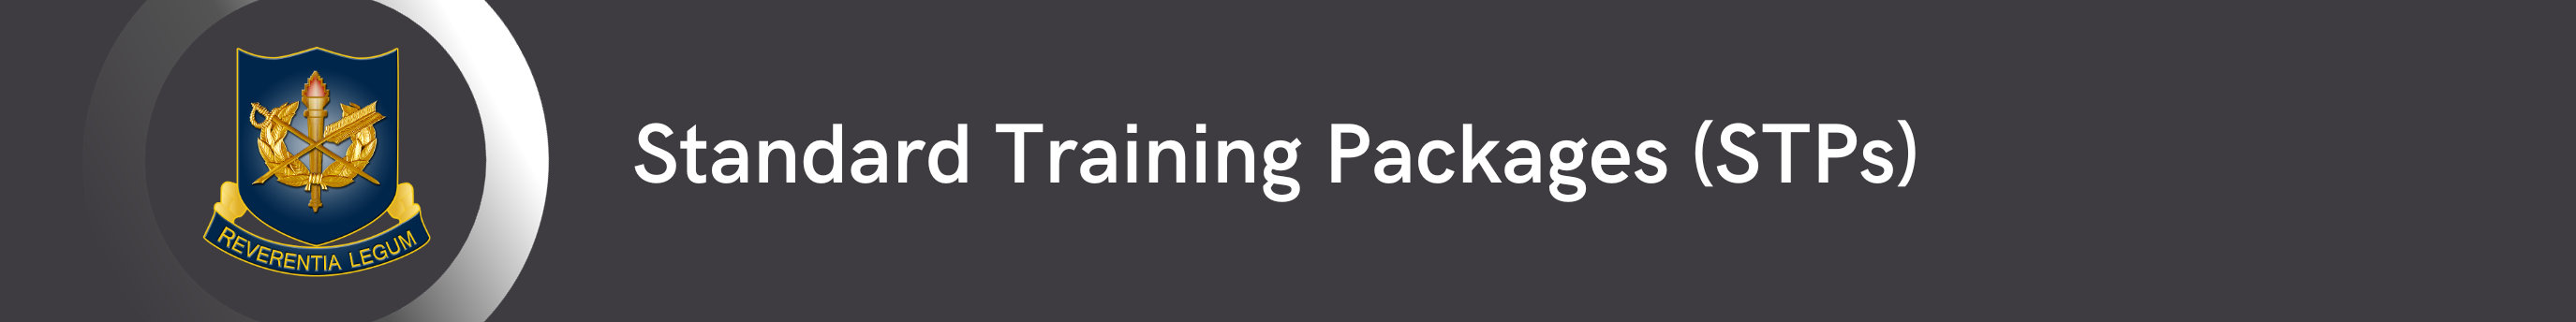 Standard Training Packages Banner